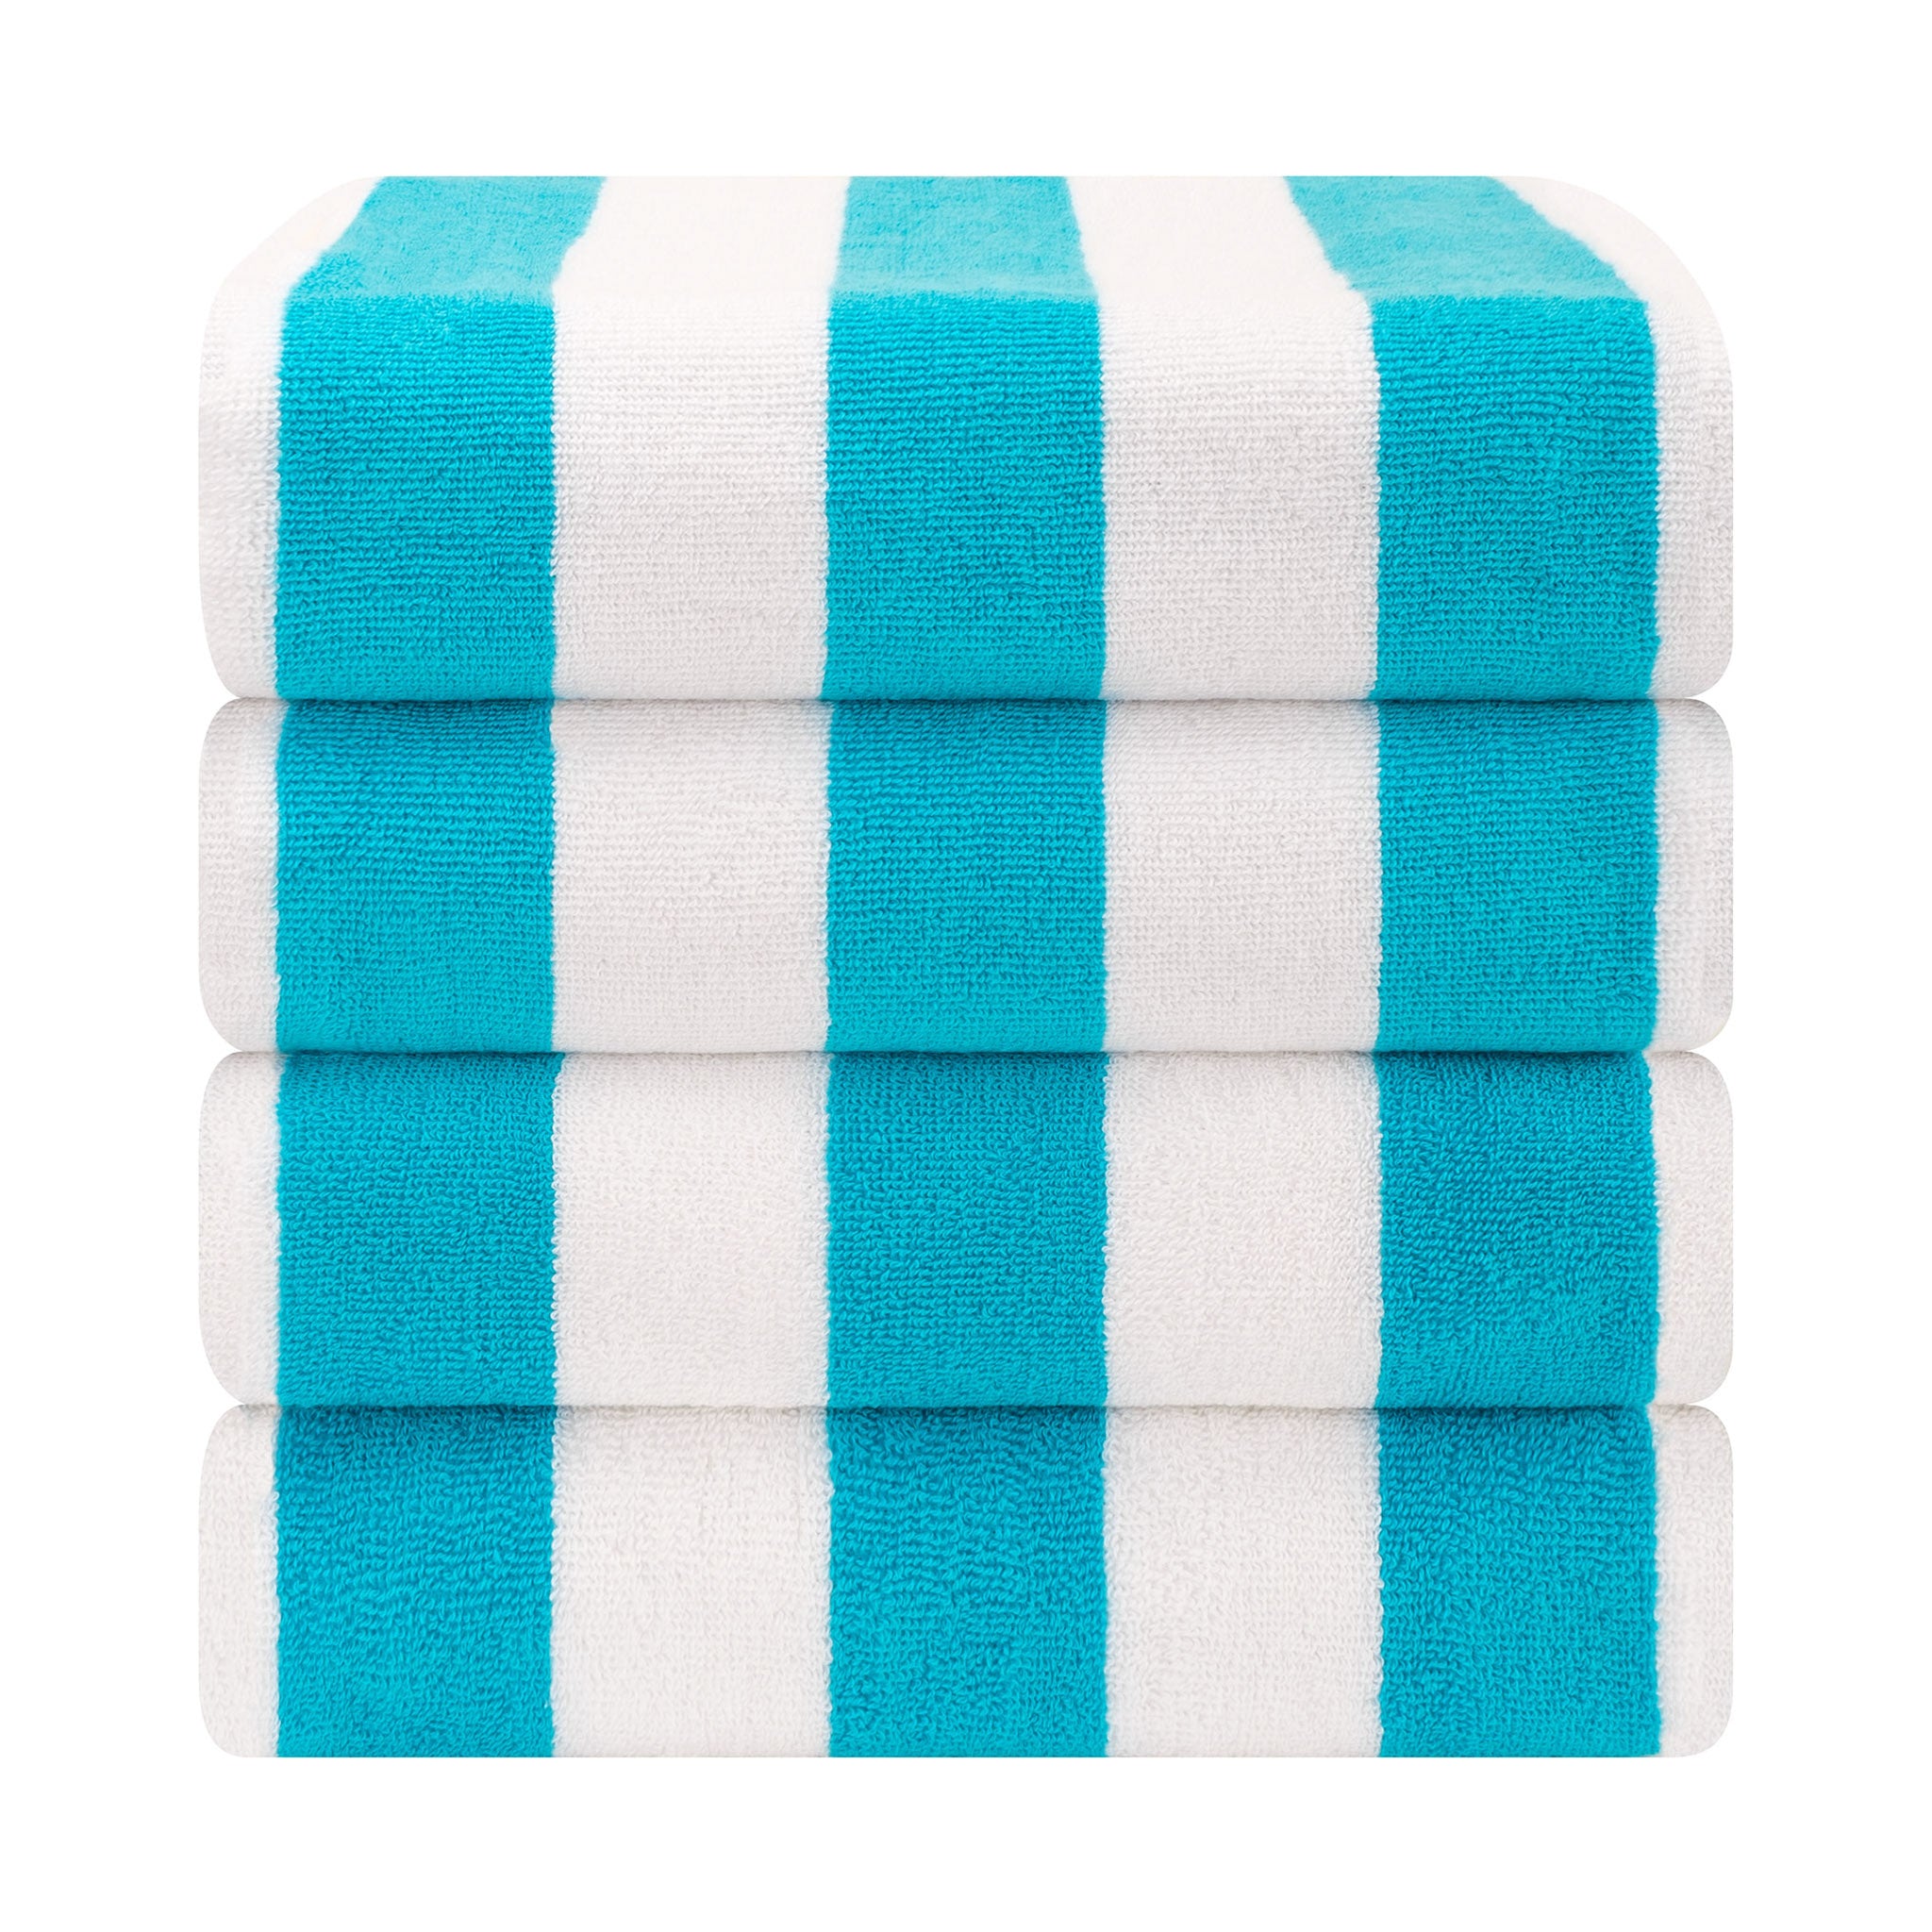 American Soft Linen 100% Cotton 4 Pack Beach Towels Cabana Striped Pool Towels -turquoise-blue-2